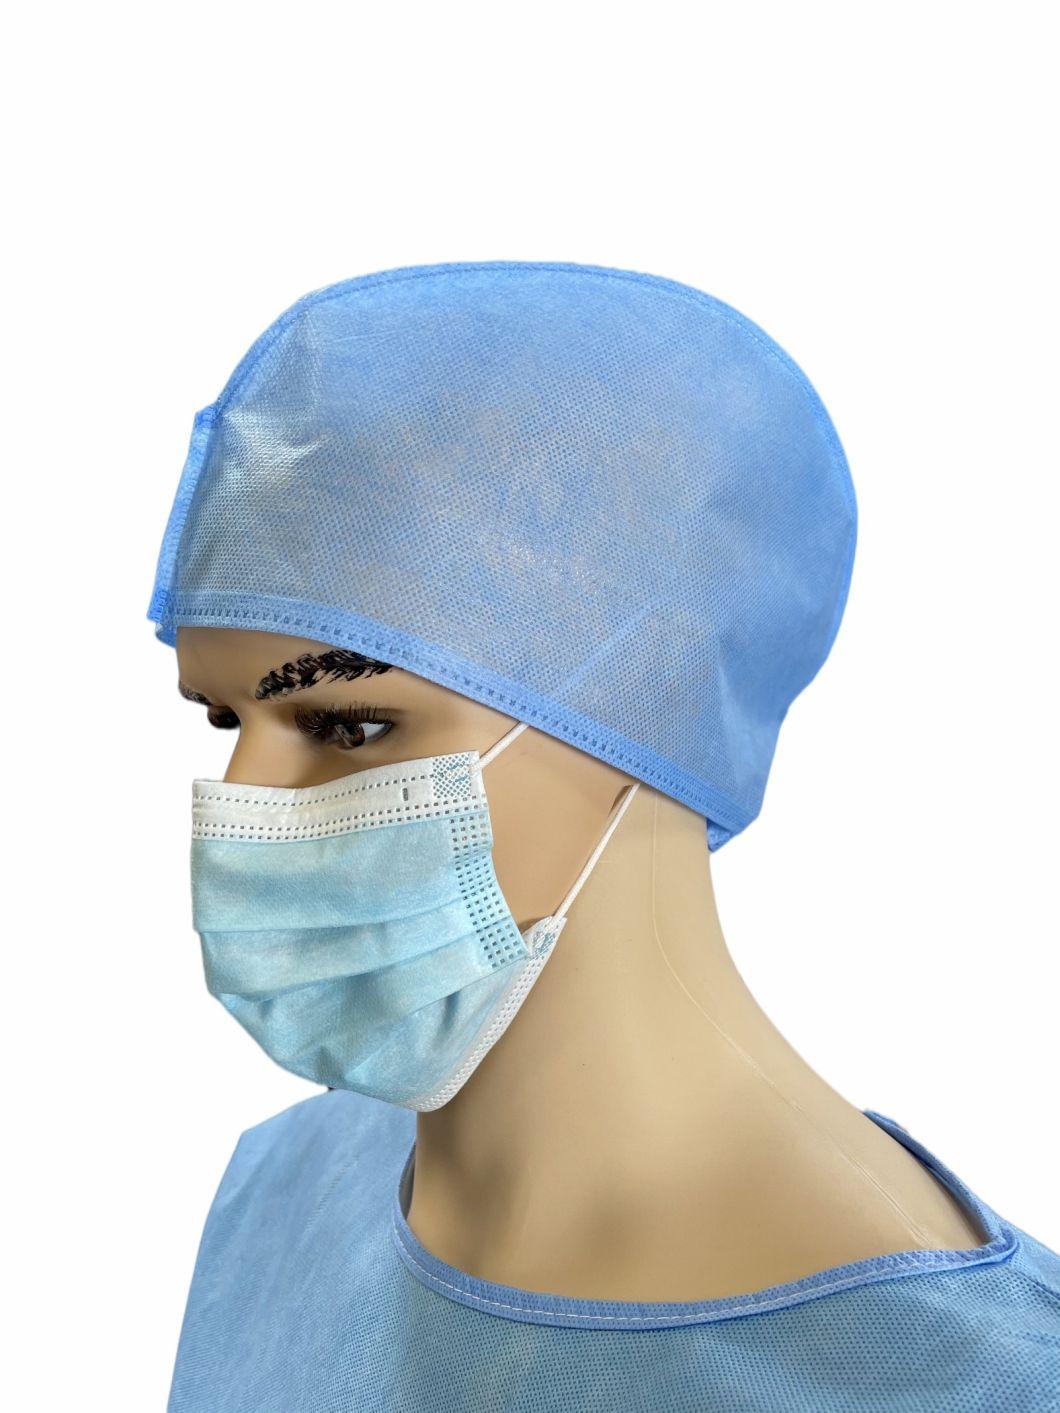 SMS Non-Sterilized Cap Disposable Waterproof Cap Apply to Dust-Free Work